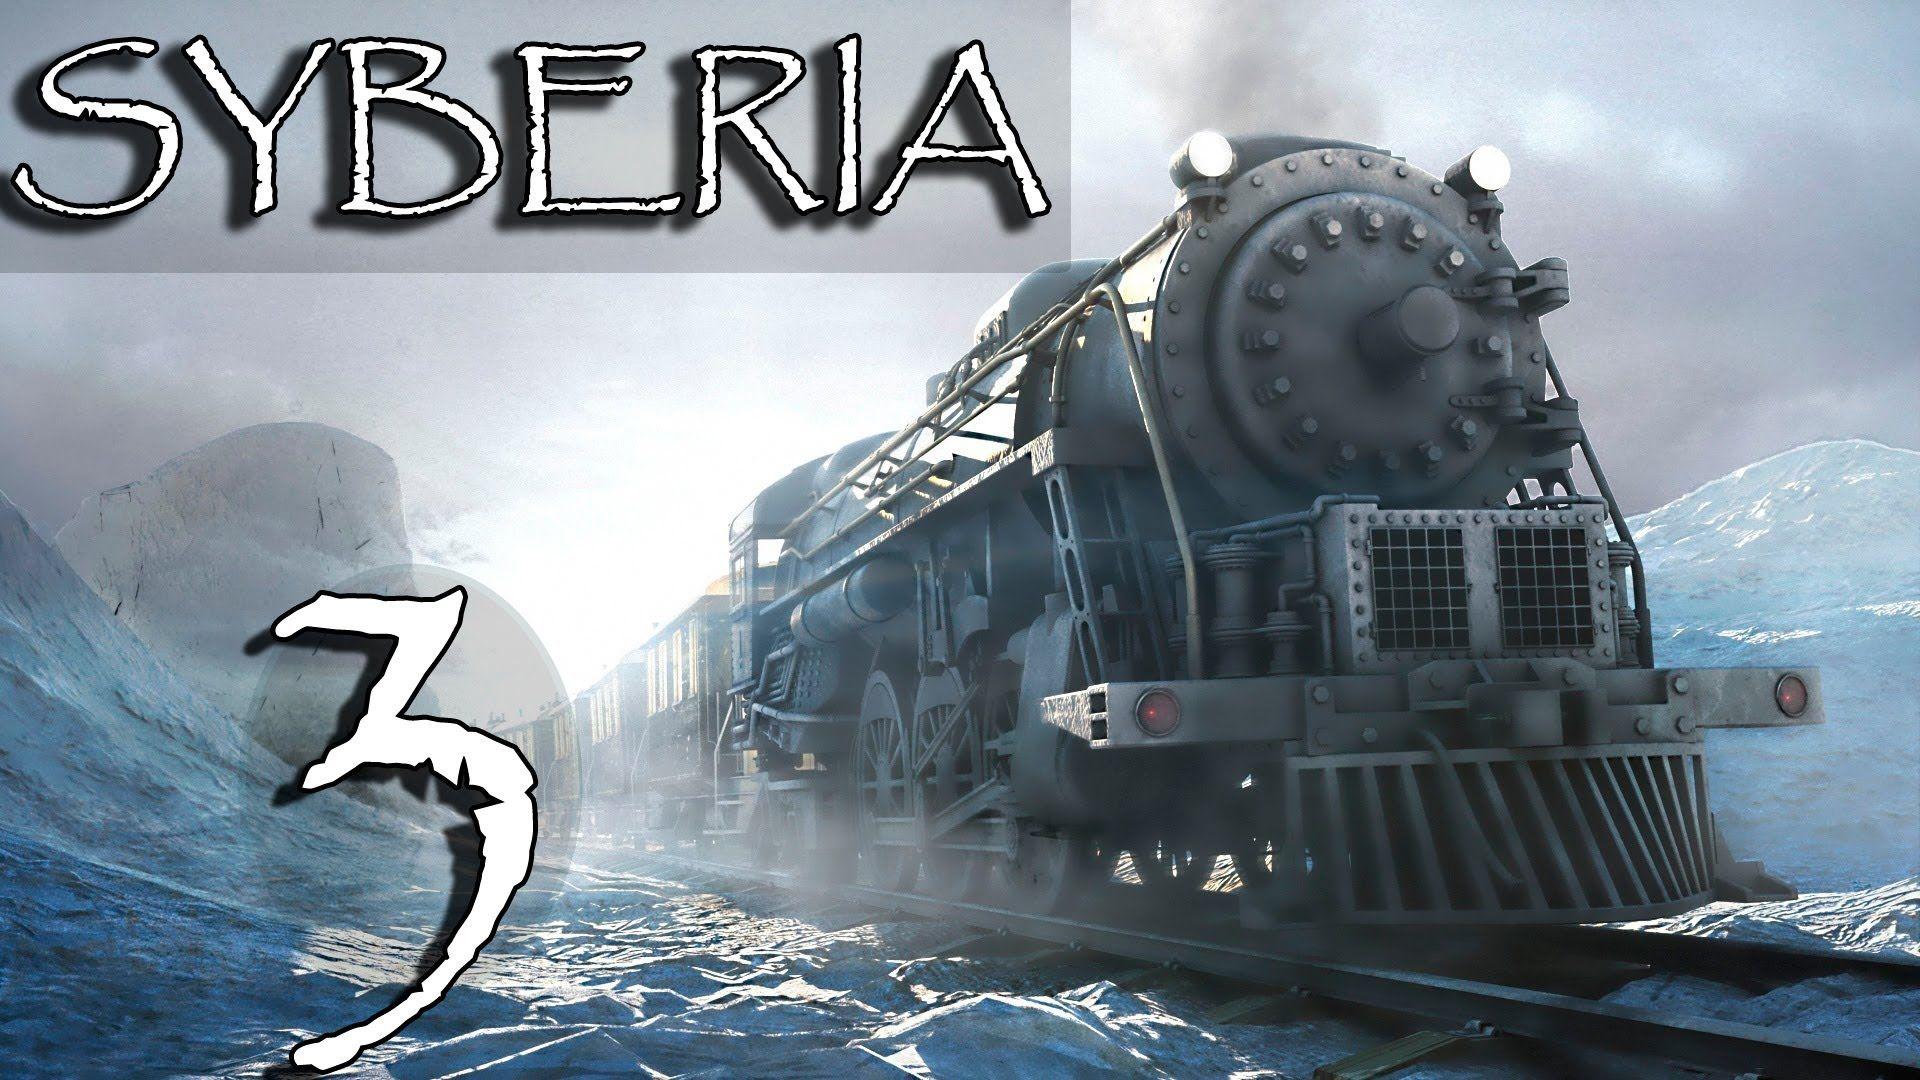 Syberia 3 HD Wallpaper. Background. Read games reviews, play